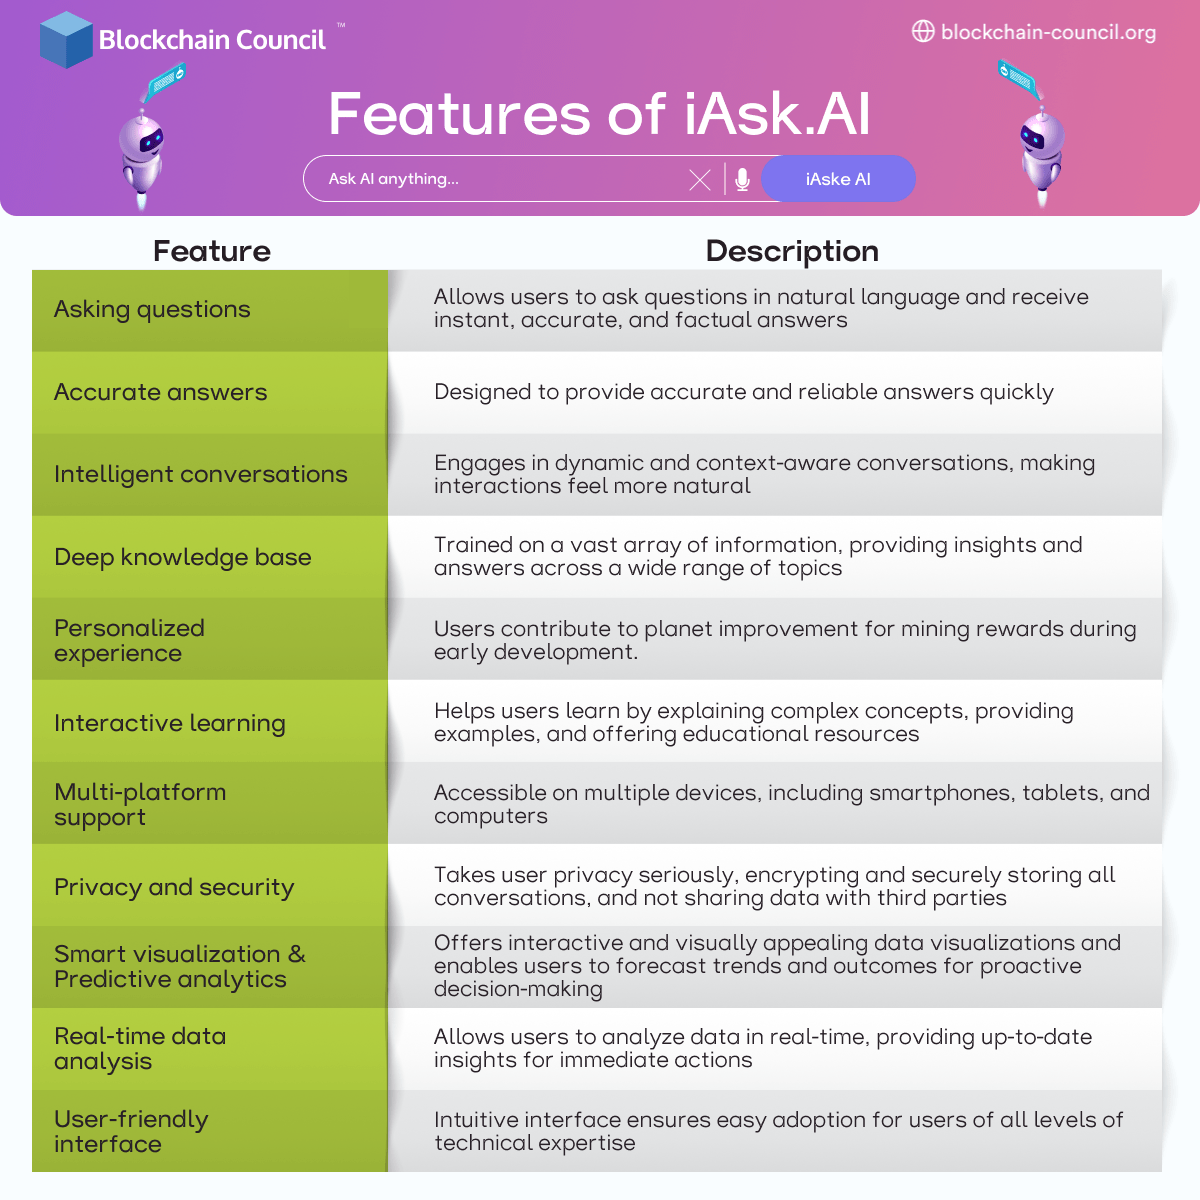 Features of iAsk.AI